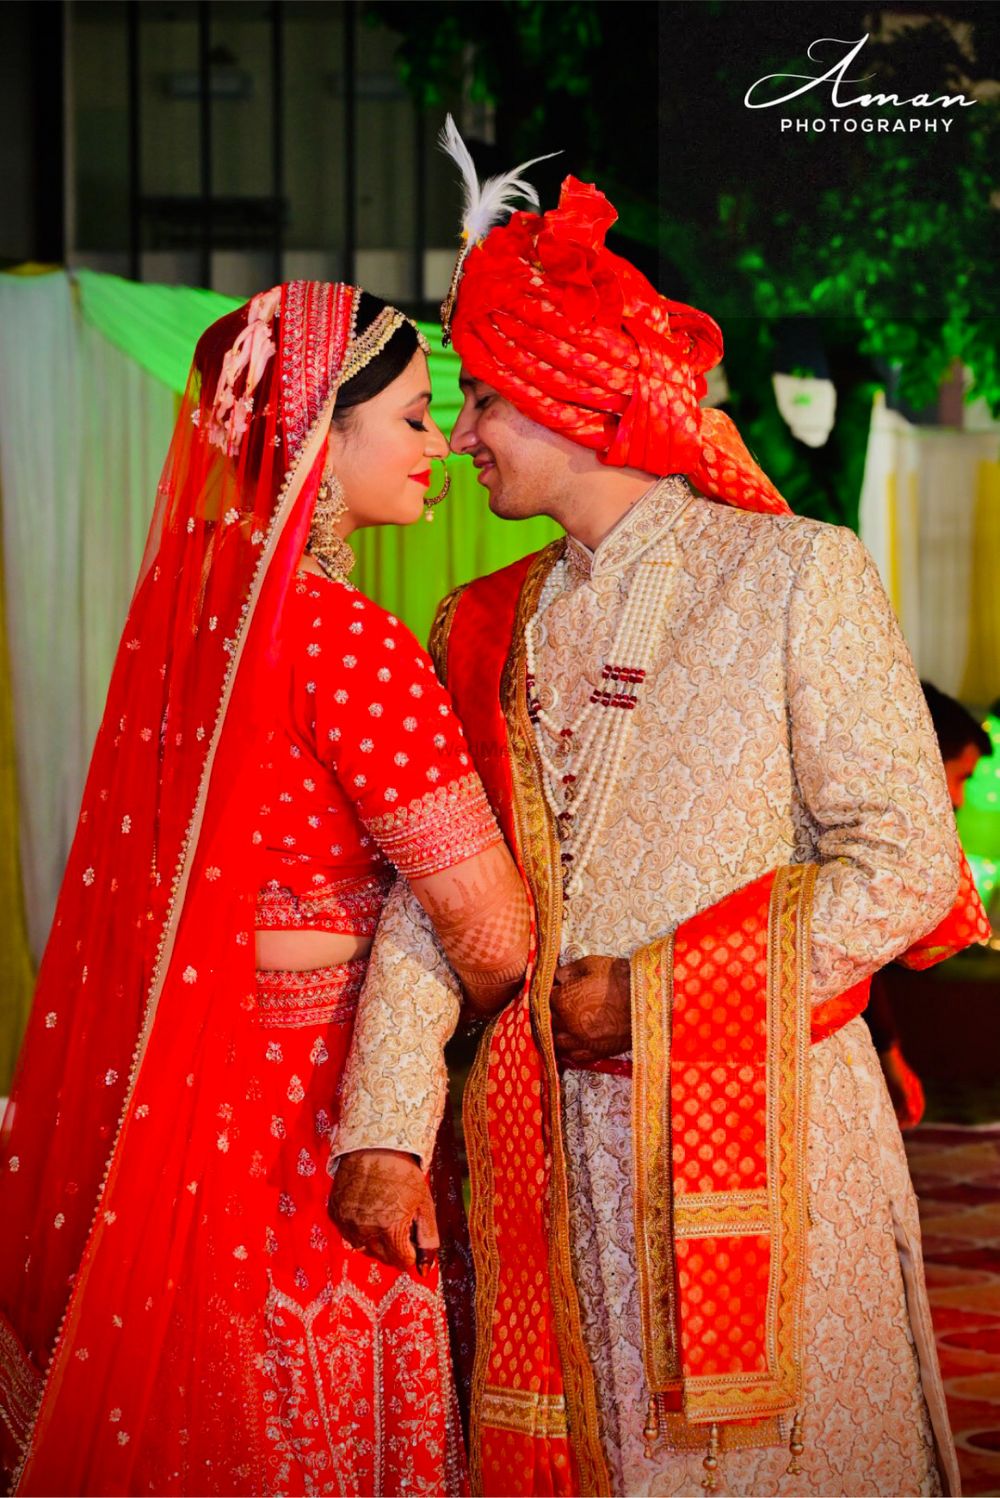 Photo From couple - By Aman Photography